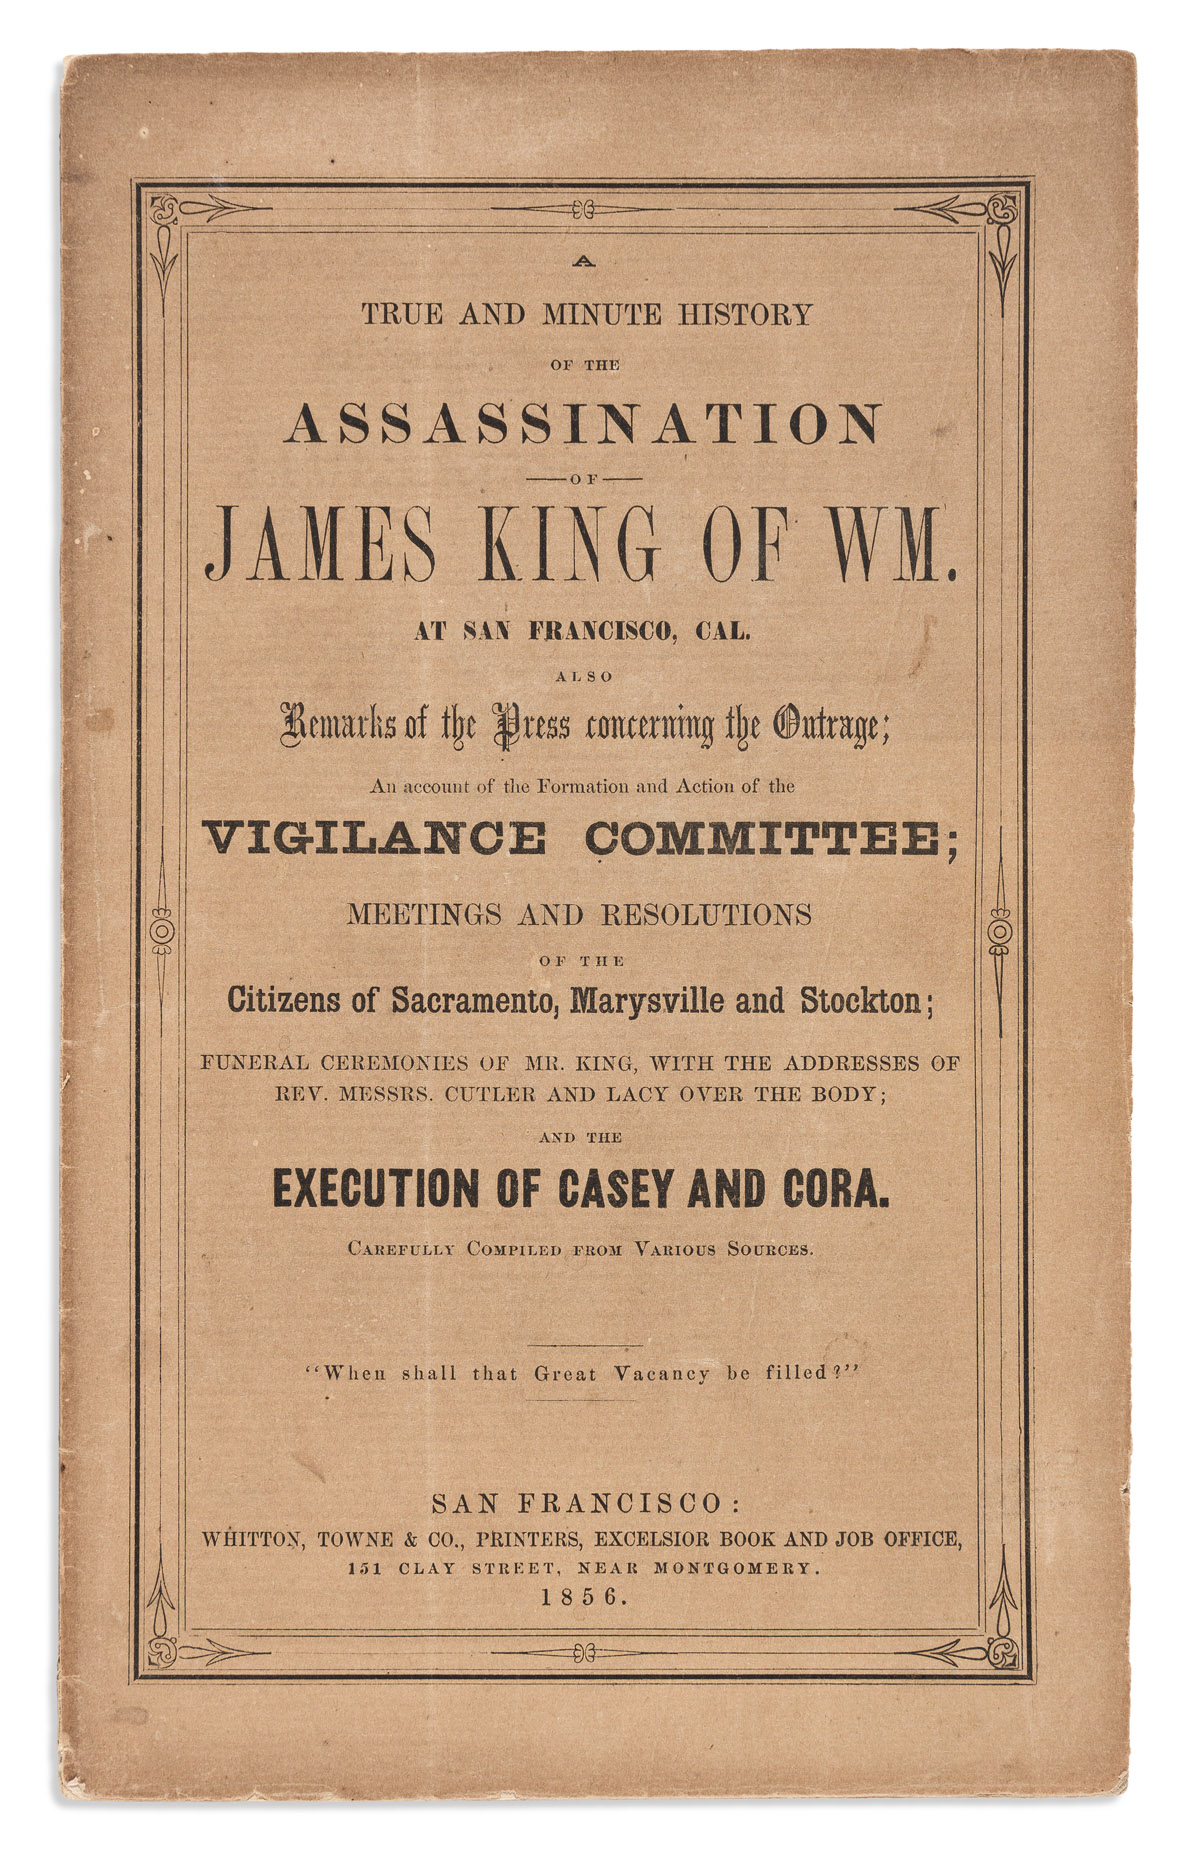 (CALIFORNIA.) A True and Minute History of the Assassination of James King.